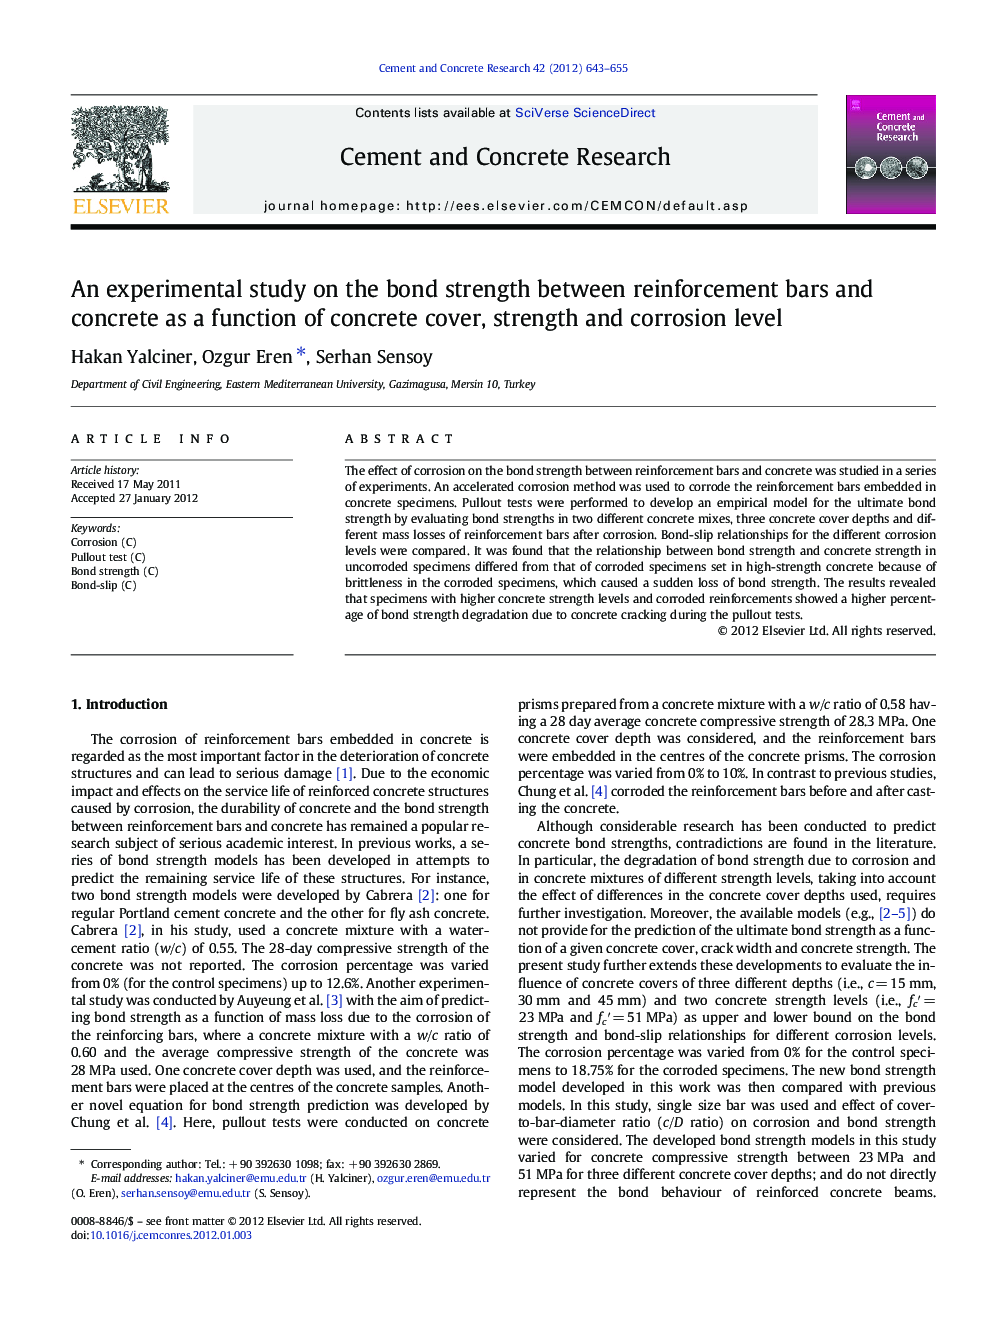 An experimental study on the bond strength between reinforcement bars and concrete as a function of concrete cover, strength and corrosion level